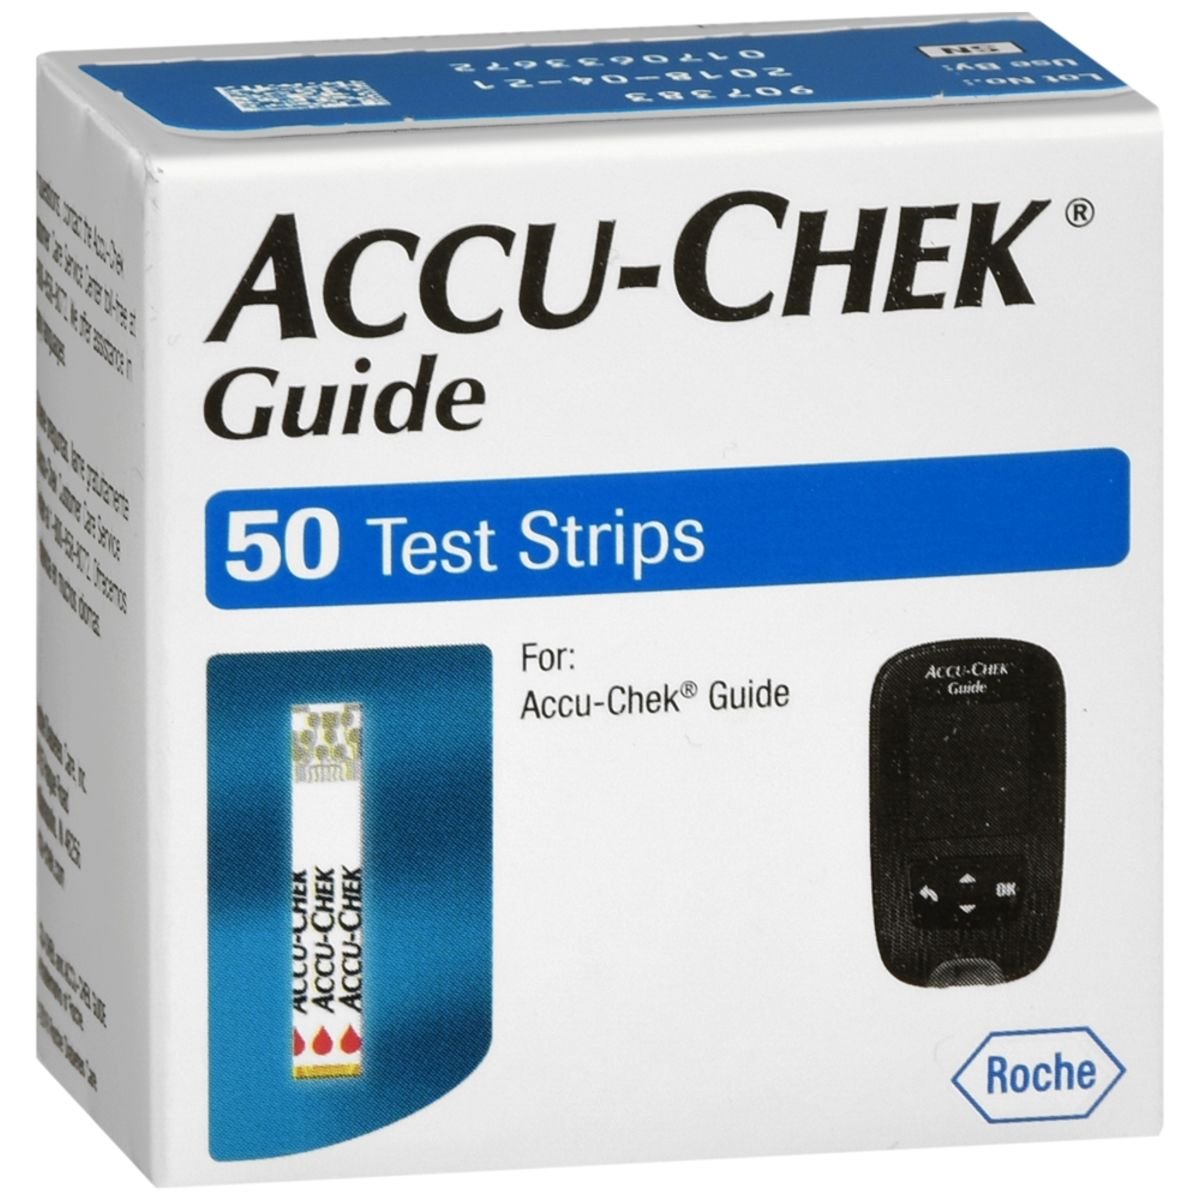 accu-chek test strips getting expensive